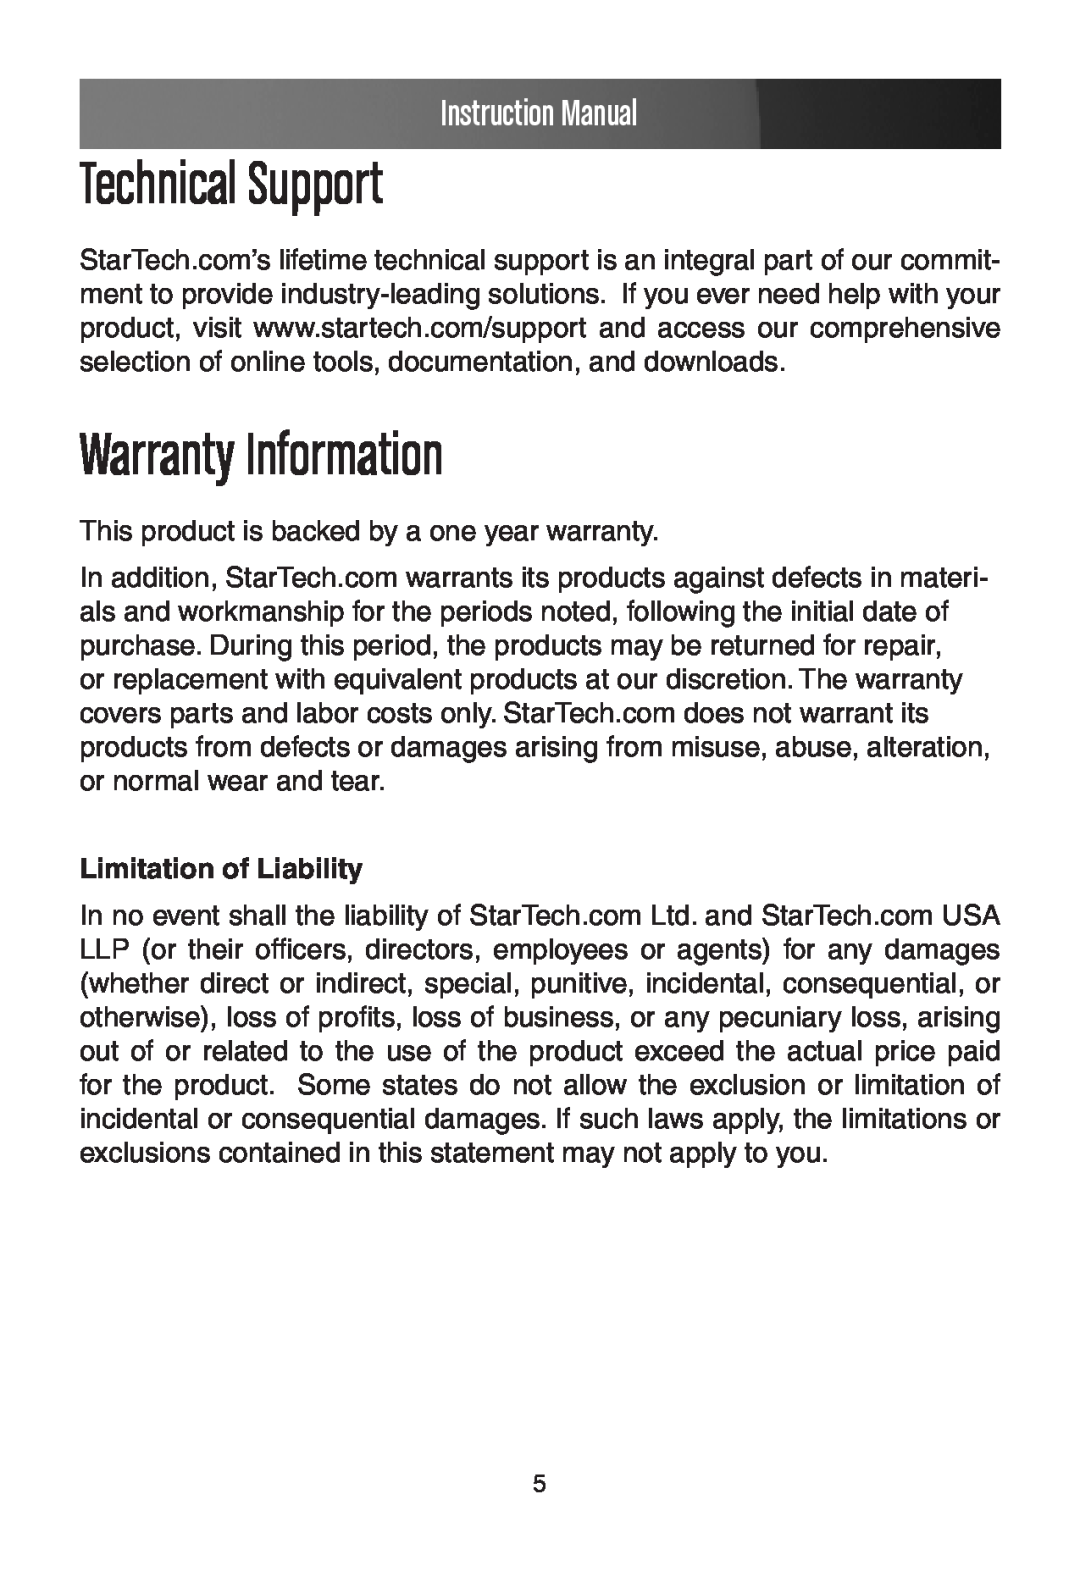 StarTech.com PEX1P instruction manual Technical Support, Warranty Information, Limitation of Liability, Instruction Manual 